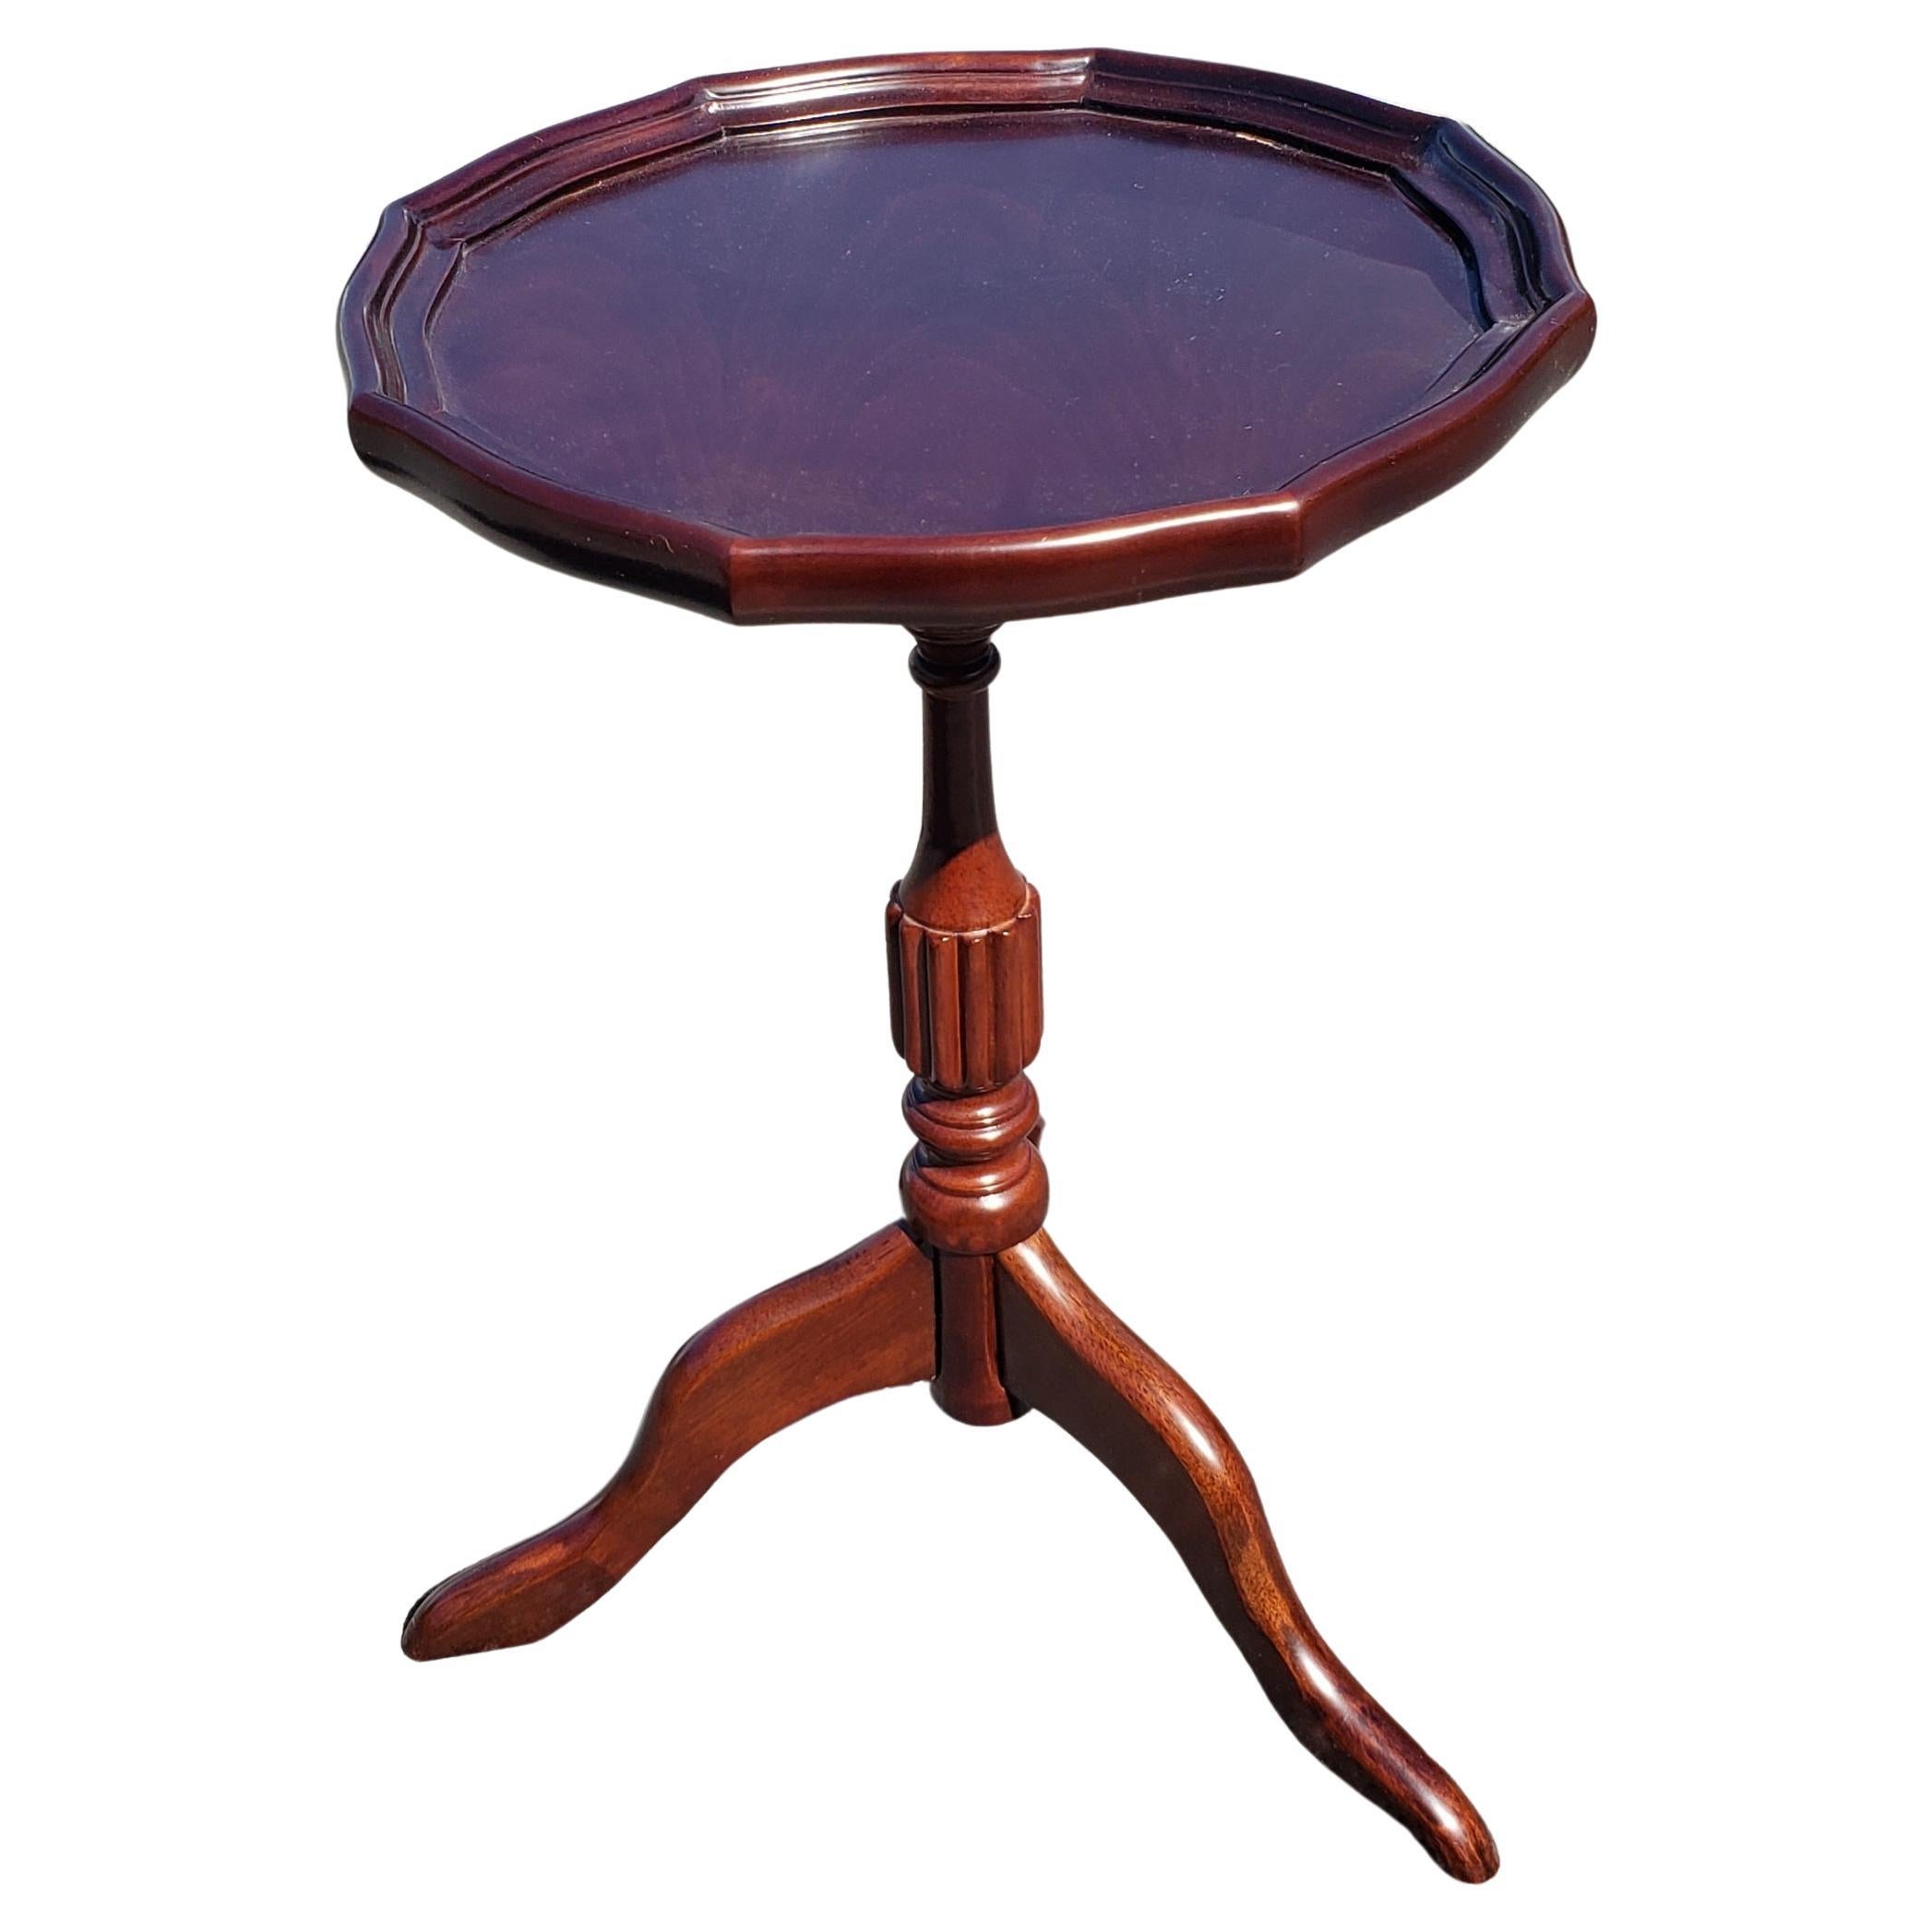 Small pedestal tripod round side table in great condition.
Measures 13 inches in diameter and stands 19.5